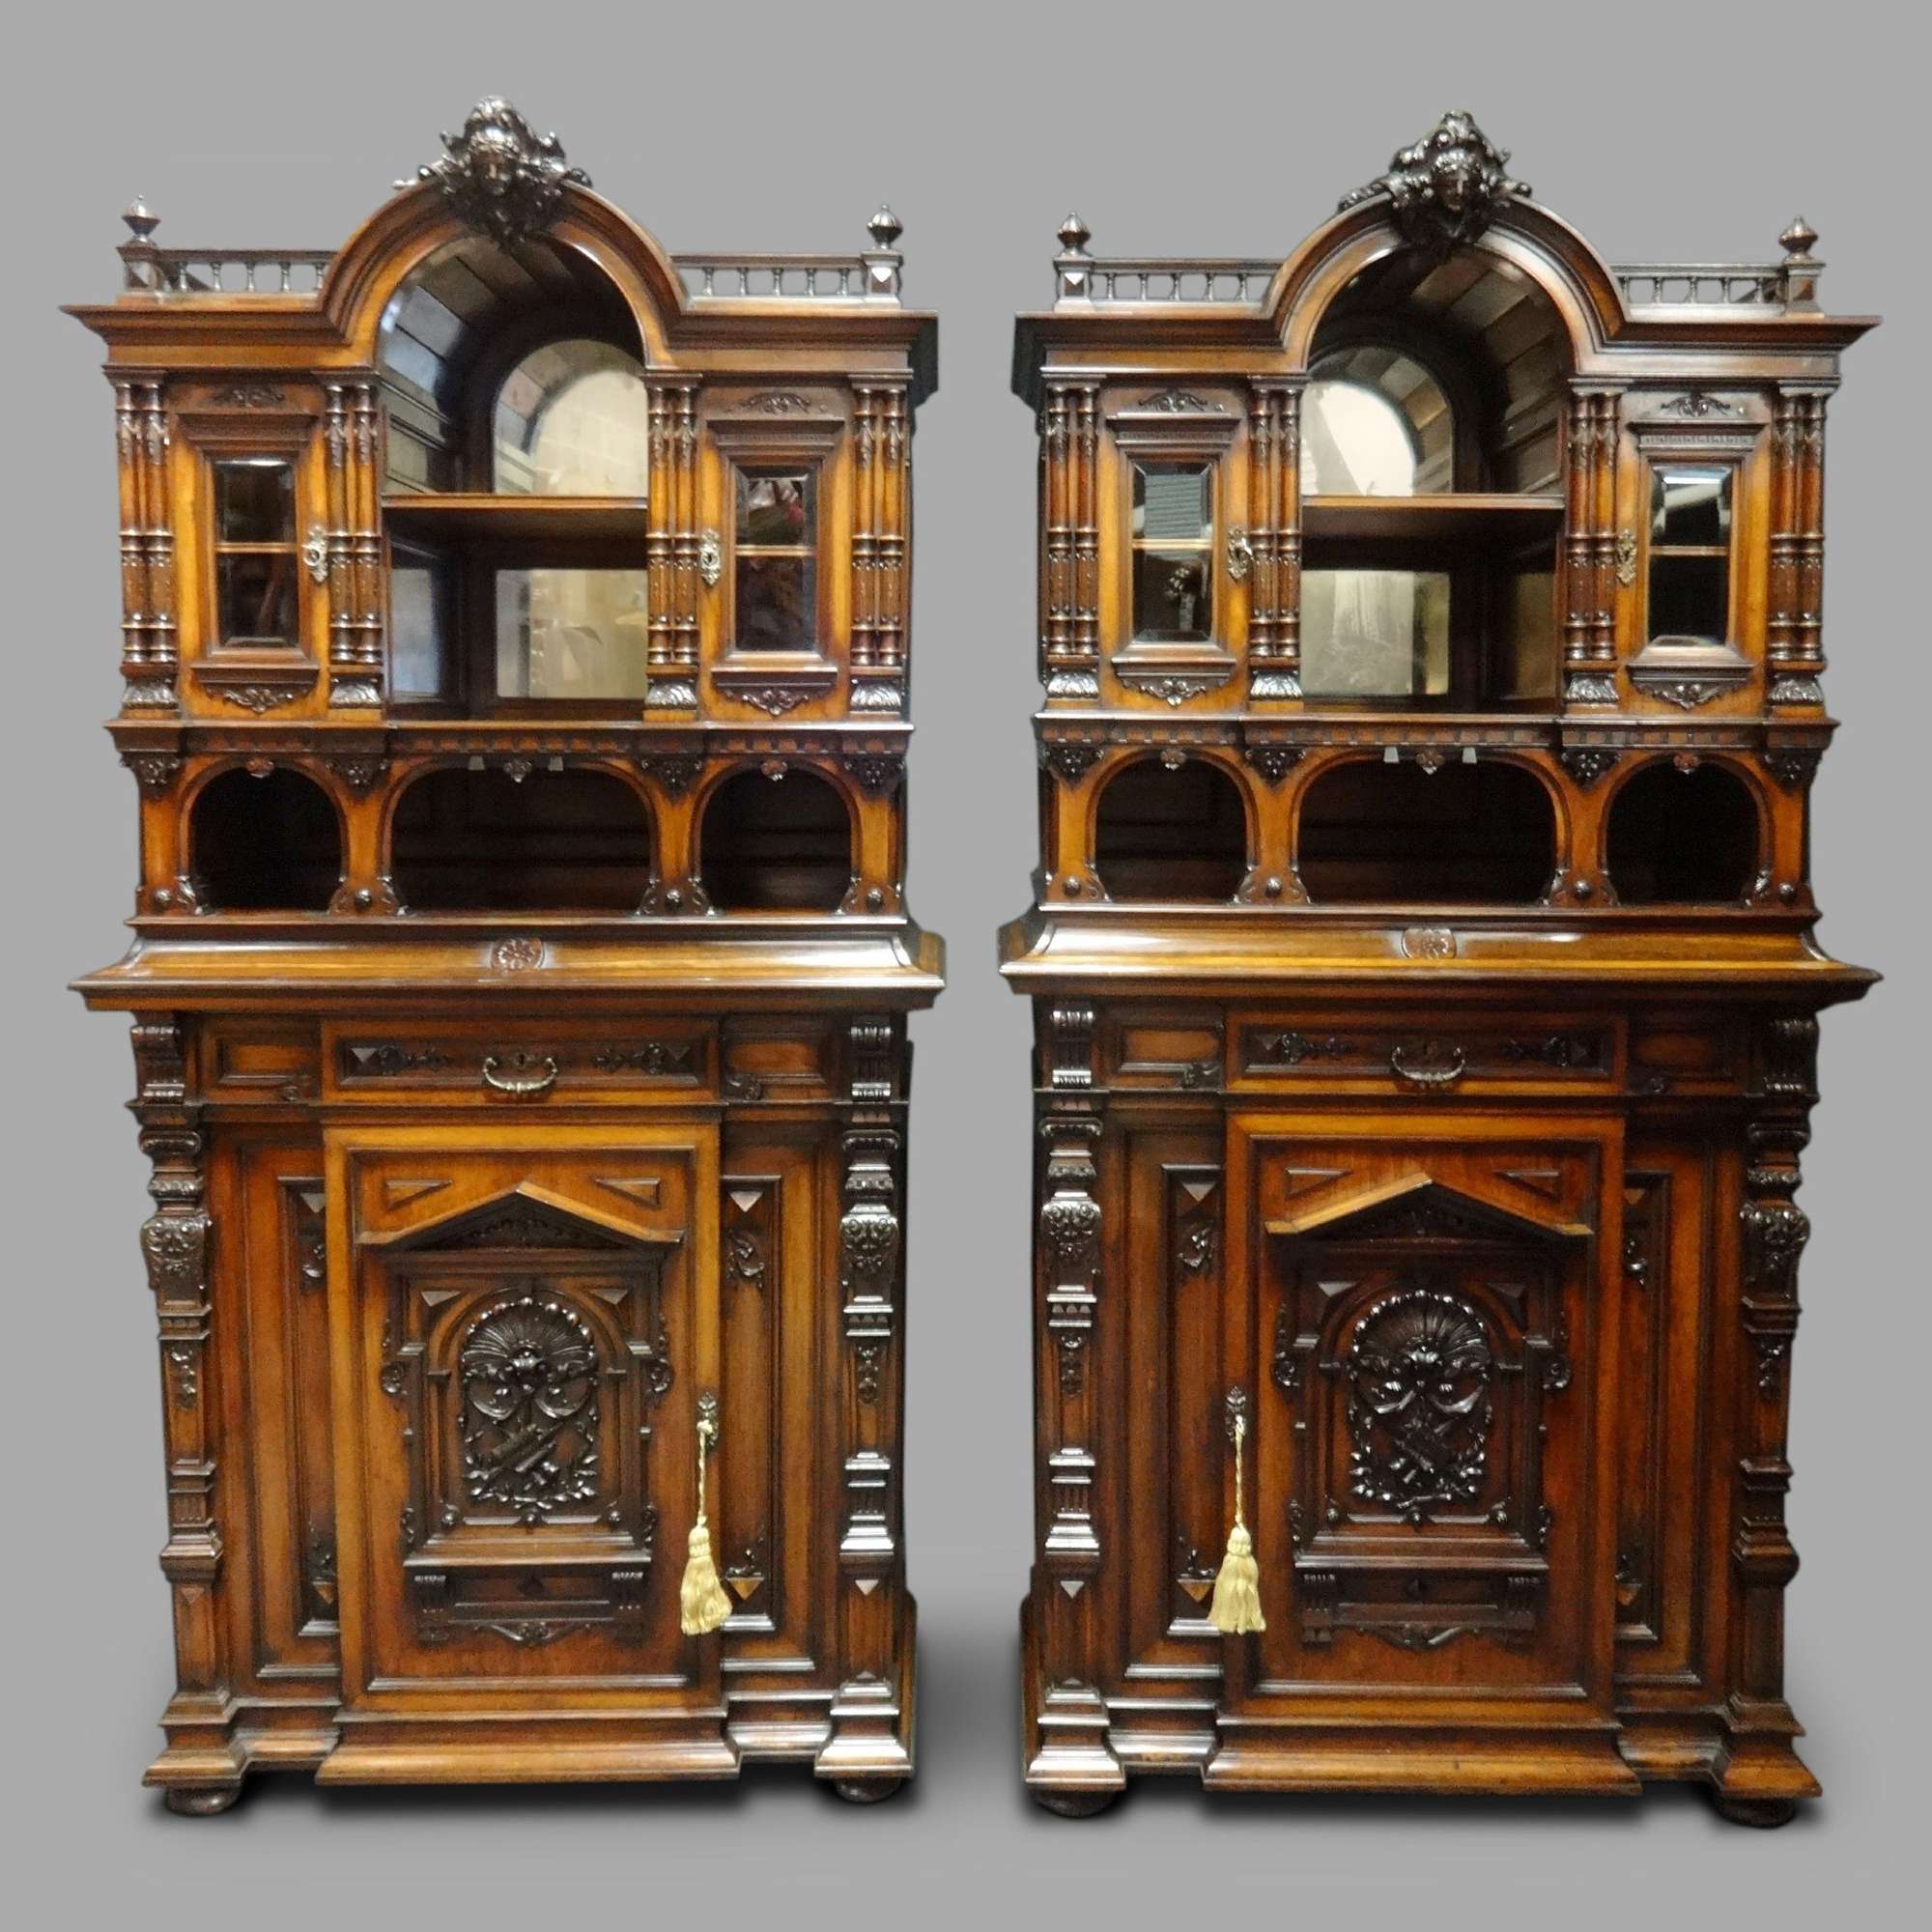 Magnificent Pair Of Rosewood Cabinets By 'sigmund Jaray, Wien'